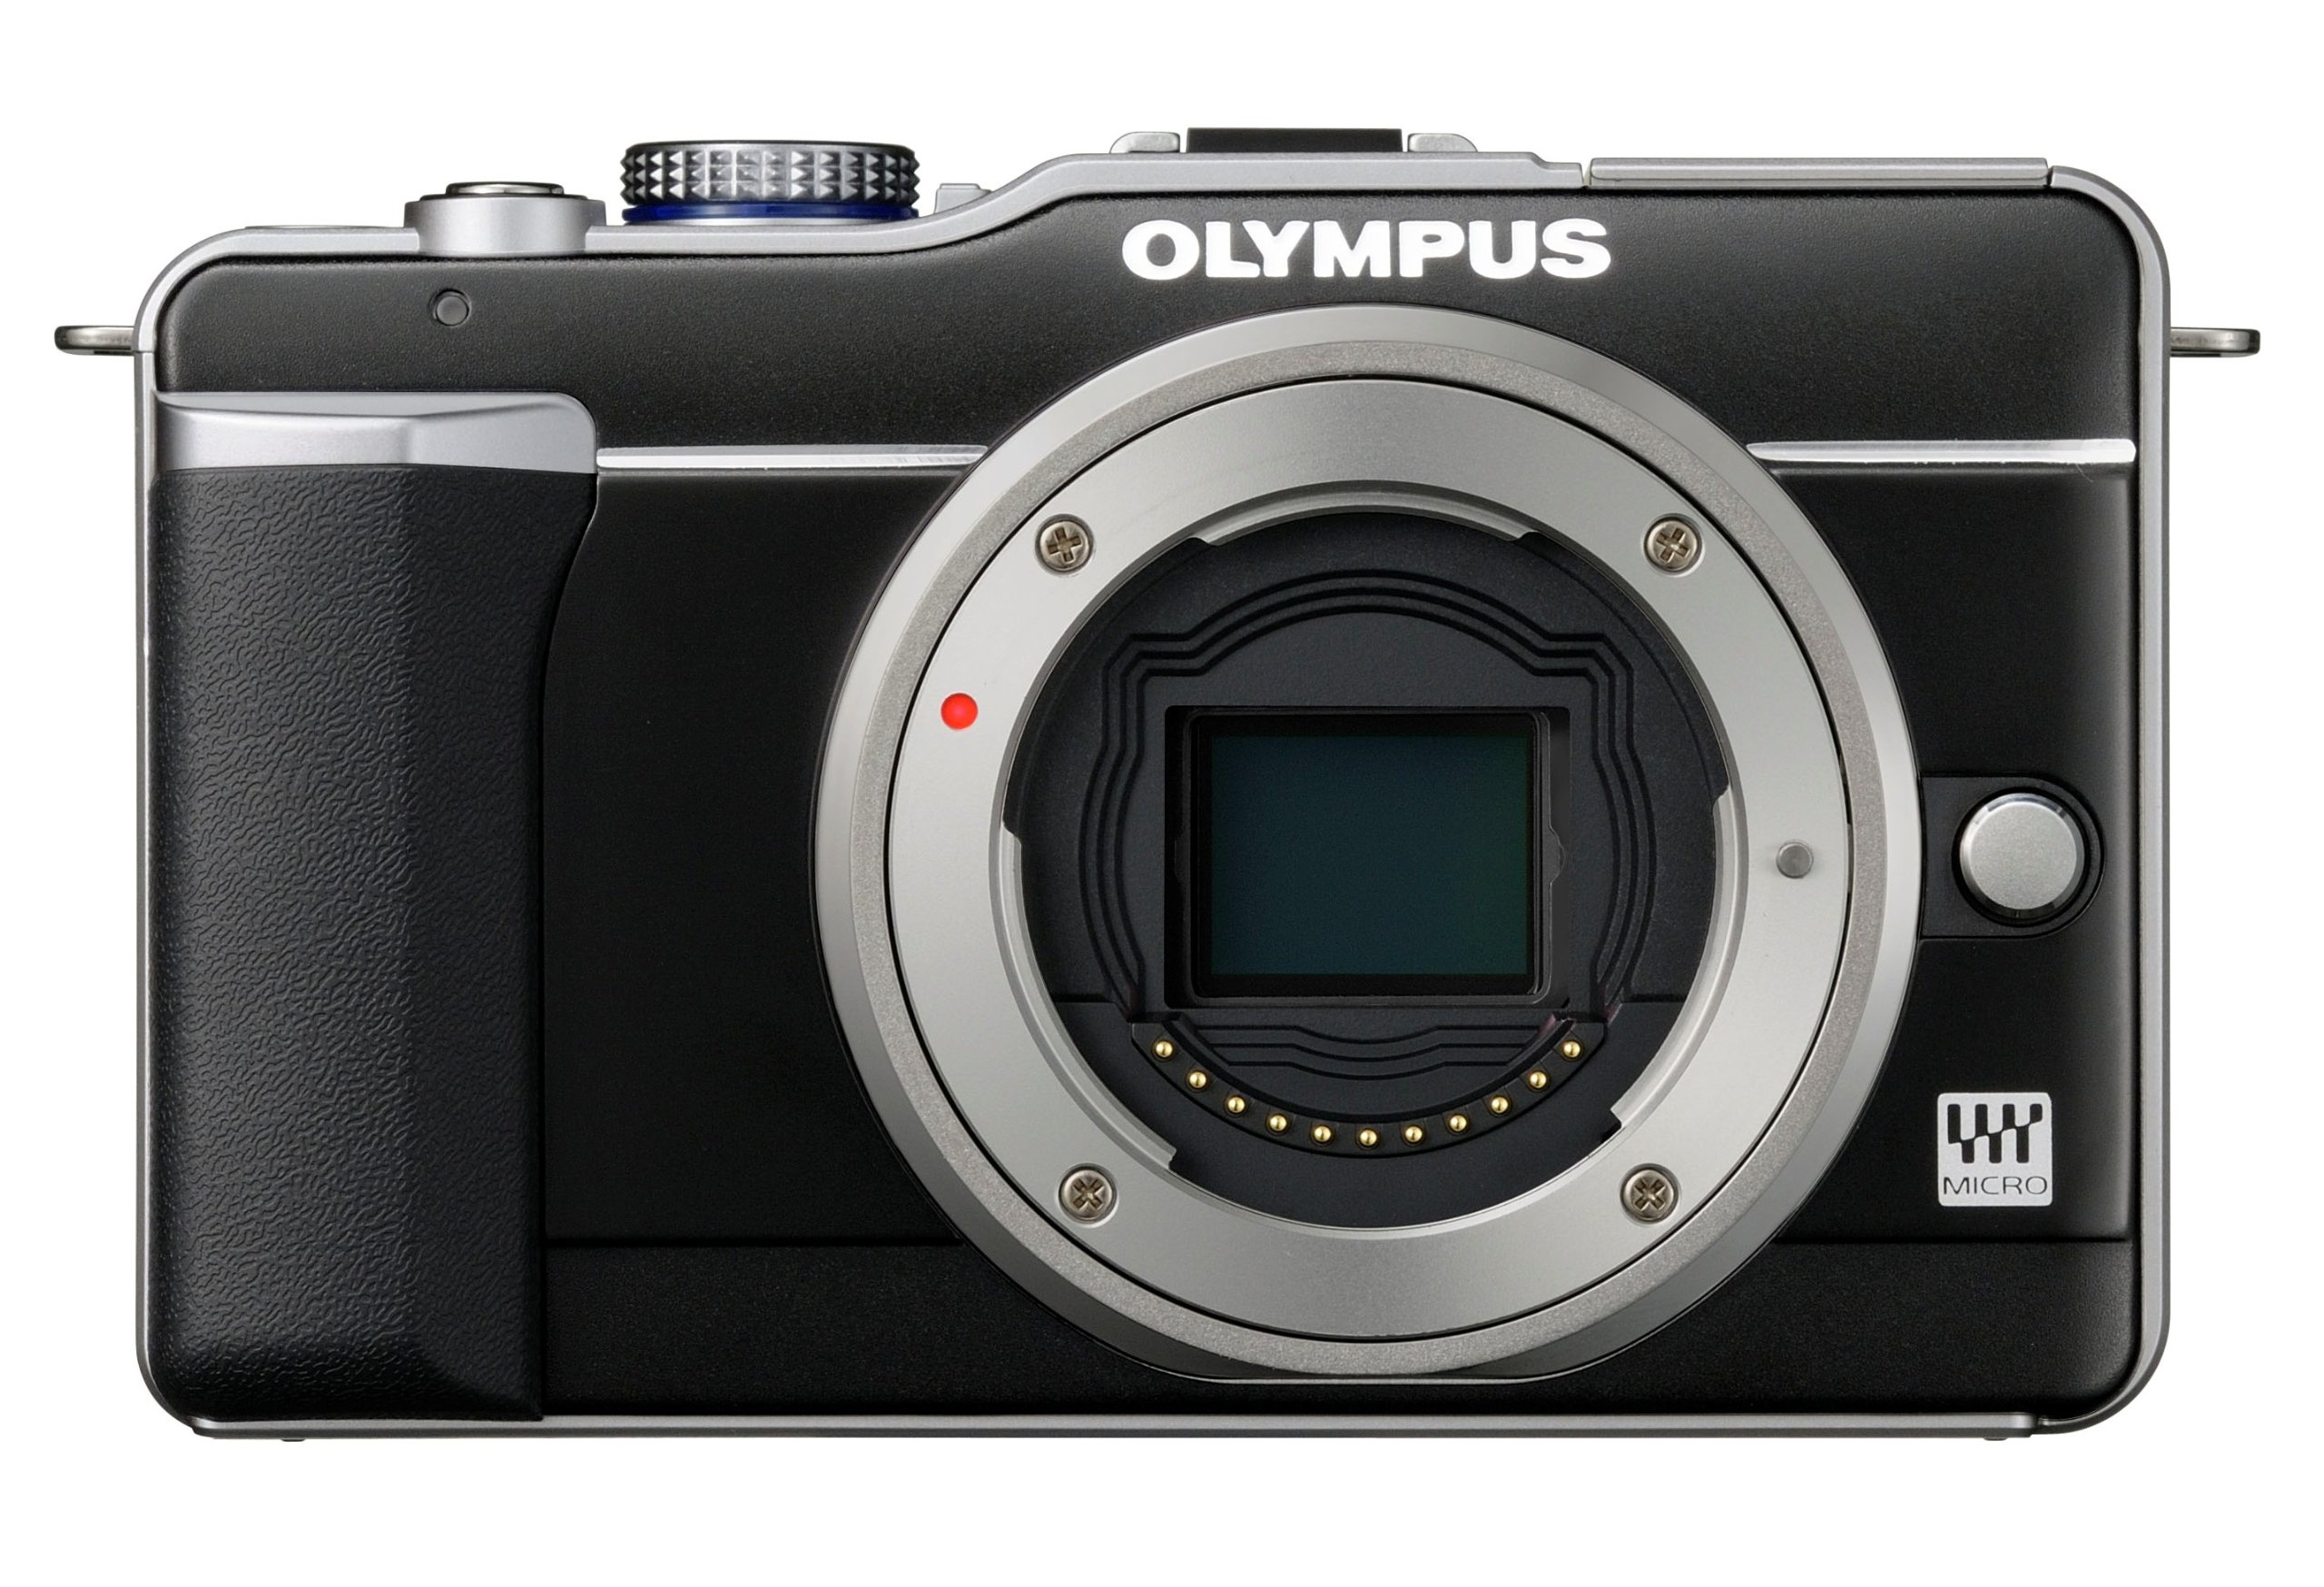 OM SYSTEM OLYMPUS PEN E-PL1 12.3MP Live MOS Micro Four Thirds Mirrorless Digital Camera with 14-42mm f/3.5-5.6 Zuiko Digital Zoom Lens (Champagne Silver)